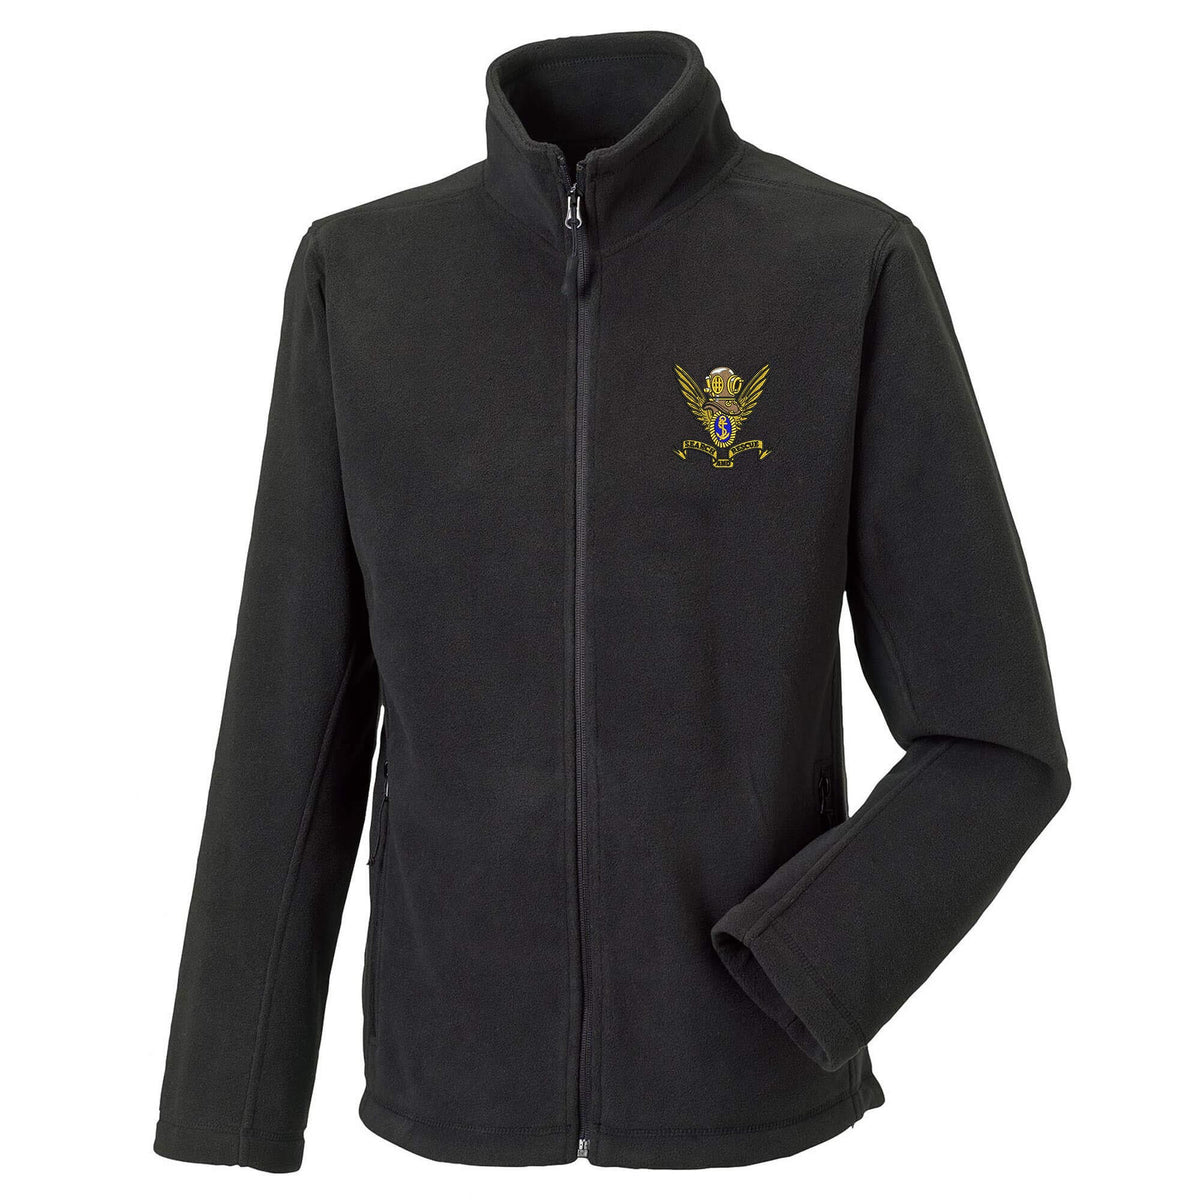 Search and Rescue Diver Fleece — The Military Store